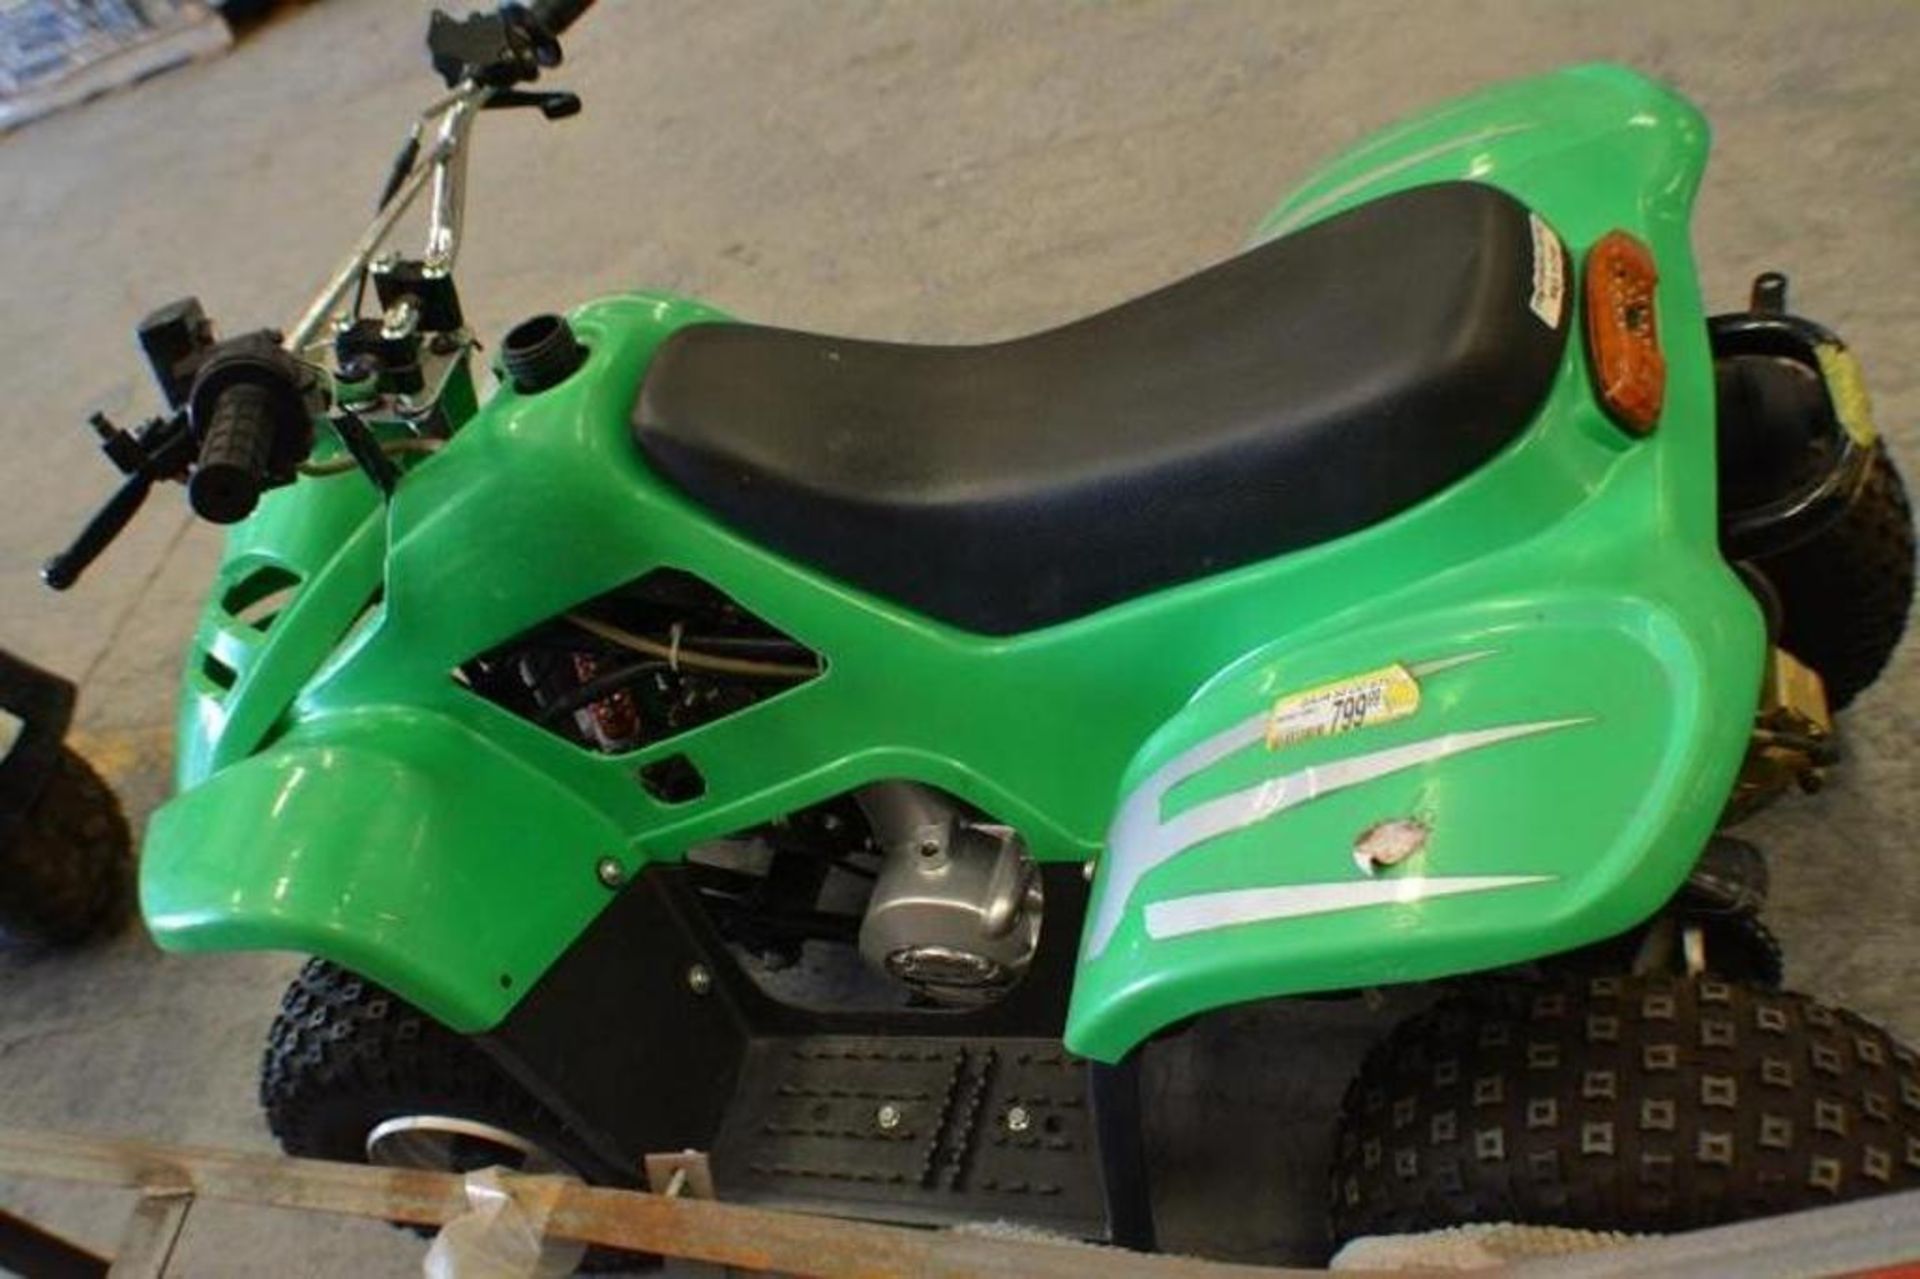 ATV 50cc 4 Stroke. Green Color. This unit are for EXPORT ONLY. Buyers acknowledges is for export onl - Image 8 of 9